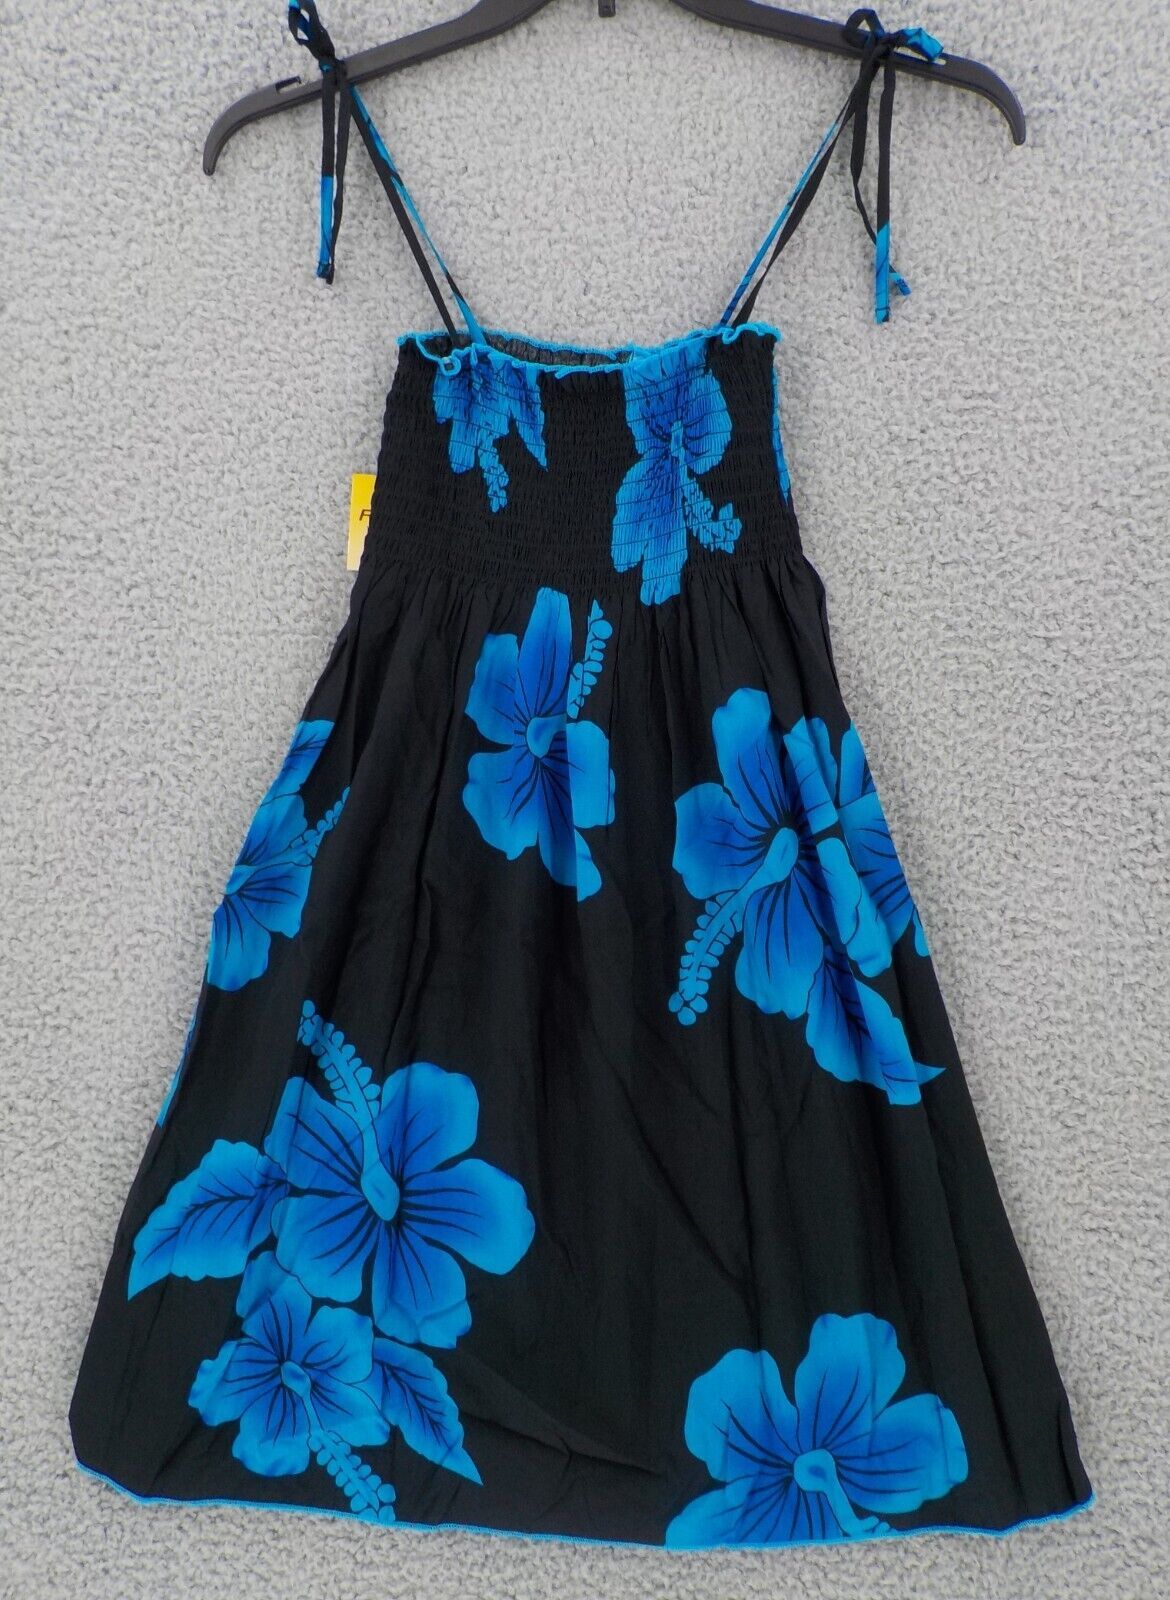 Primary image for FAVANT SPAGHETTI STRAP GIRLS SUNDRESS SZ 8 BLACK WITH BLUE HIBISCUS FLORAL NWT